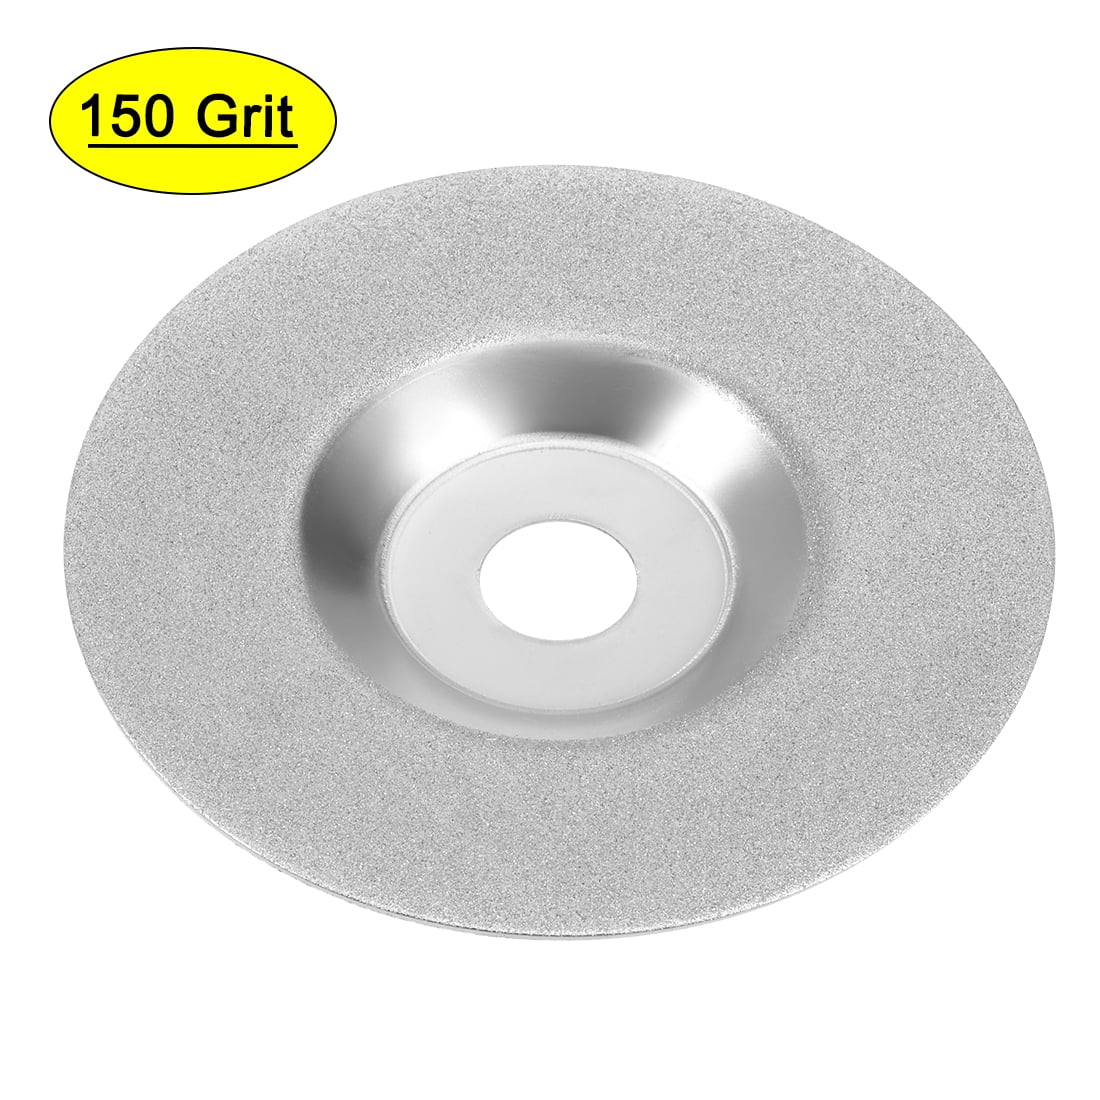 4" Inch 100mm Diamond Grinding Wheel Disc Coated Grit 60 Stone Tools For Grinder 